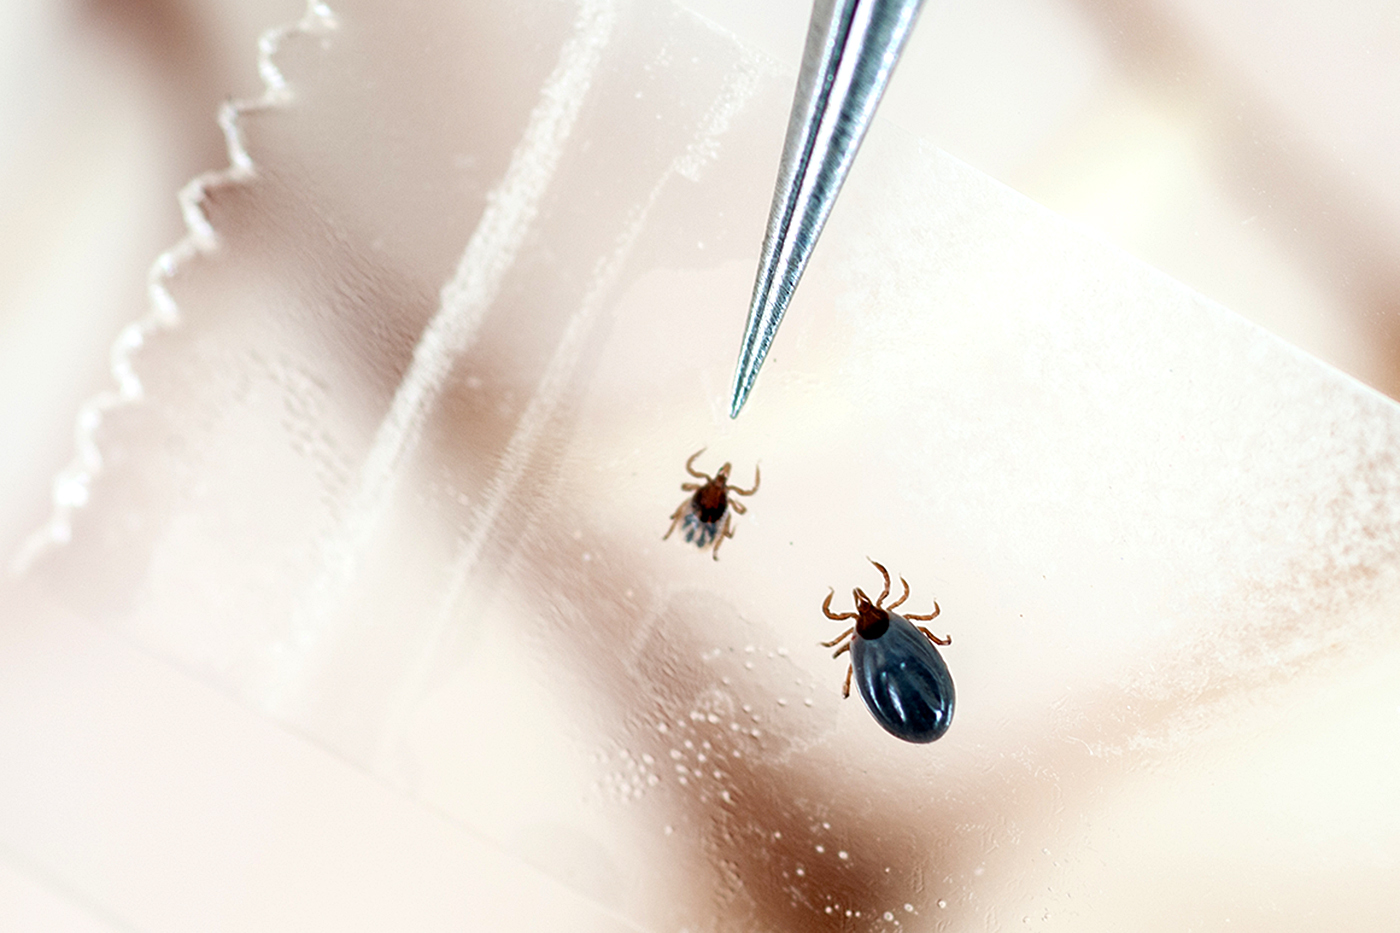 Tweezers pointing to a tick while doing Lyme disease research in College Park, Maryland, USA